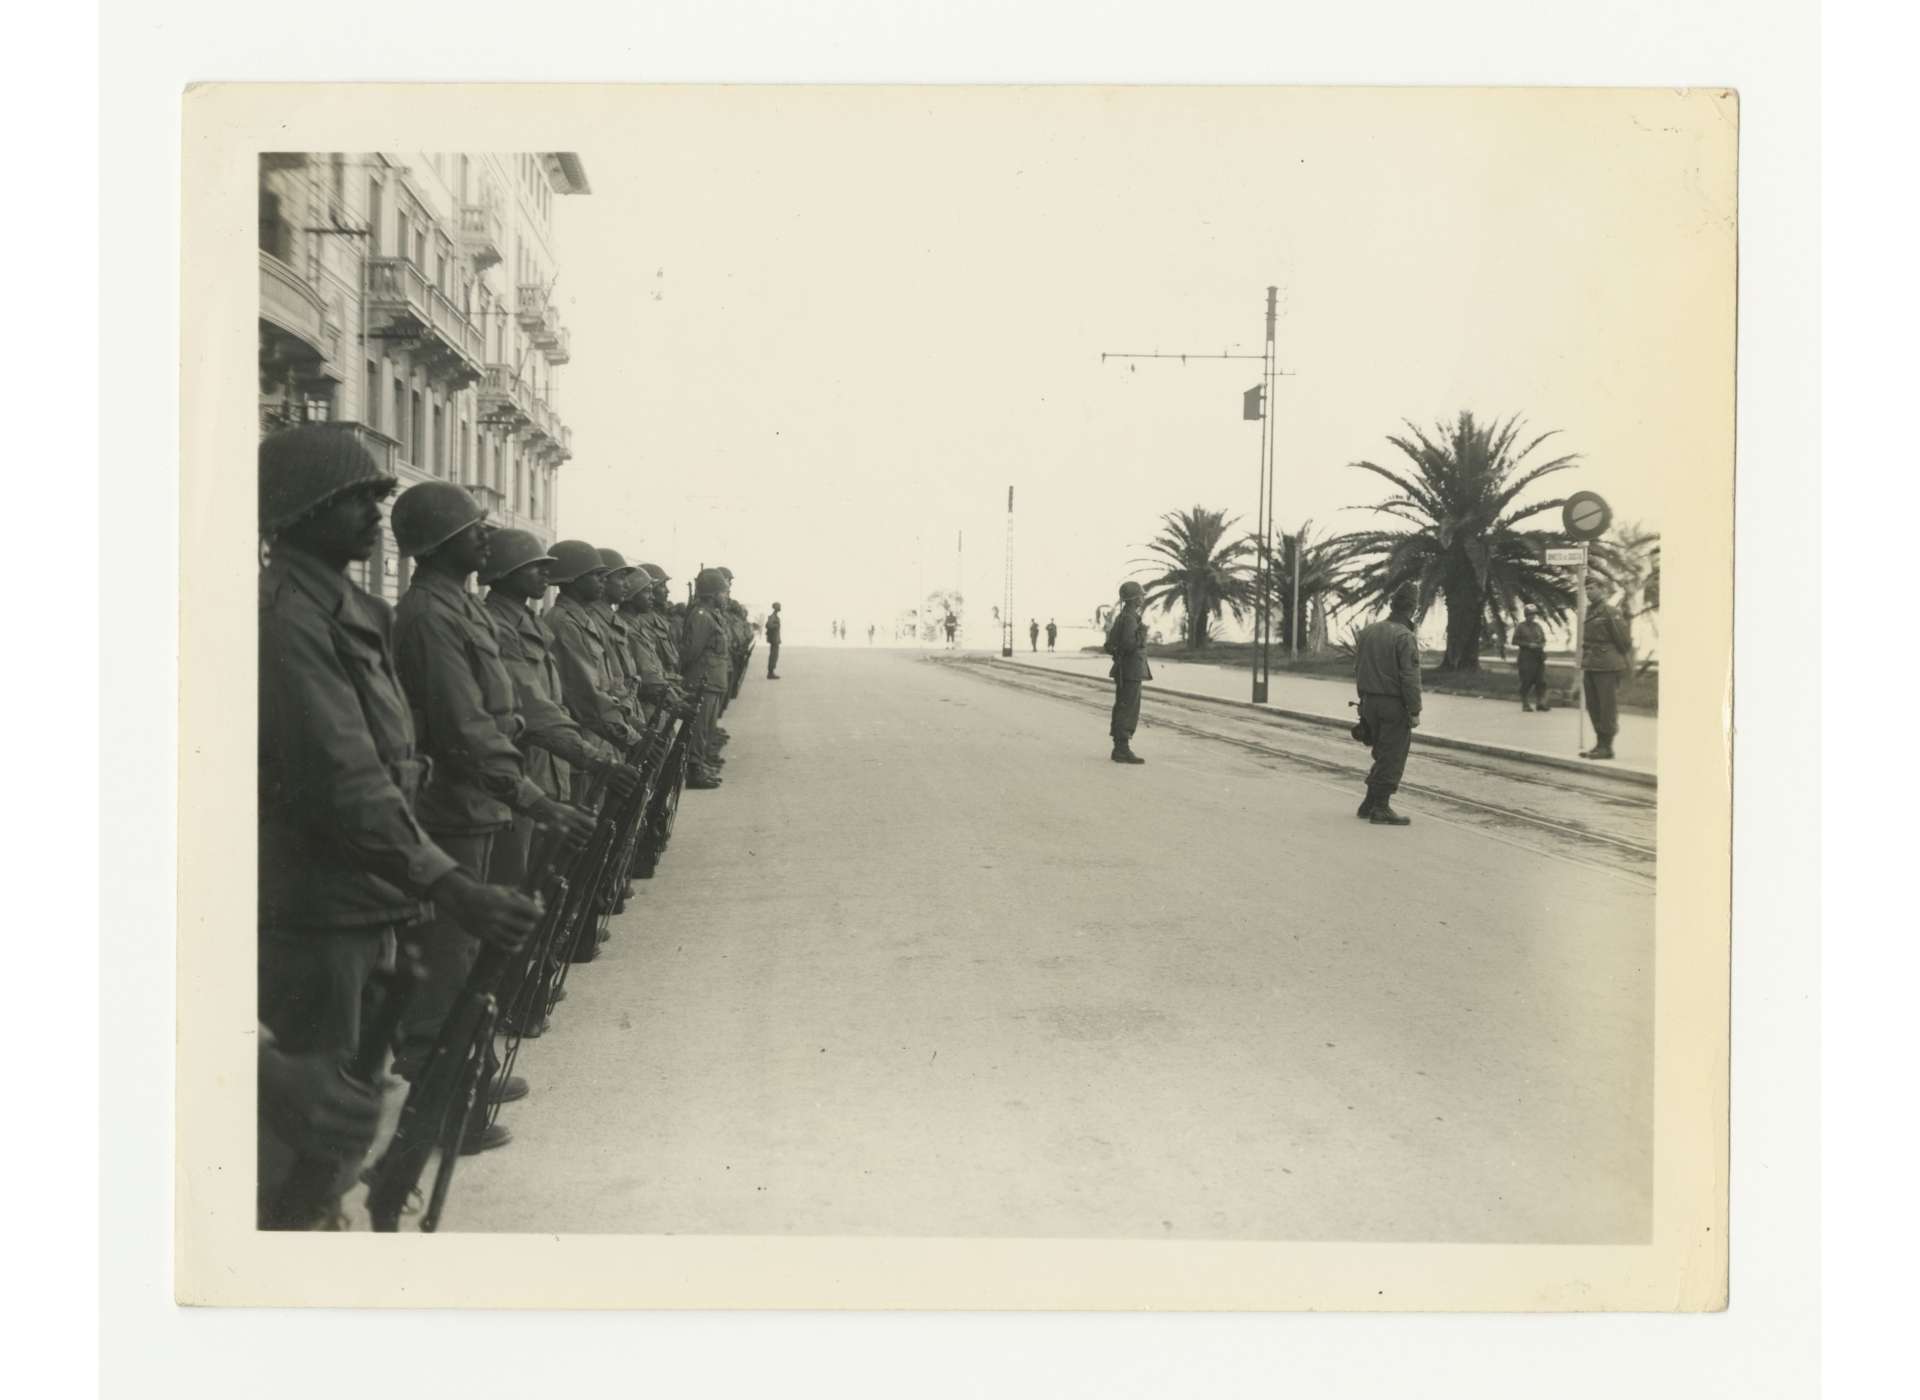 African-American soldiers of the 92nd Infantry Division, 370th Regimental Combat Team stand at attention while Lt. General Mark Clark speaks to them during a decoration ceremony, Via Reggio area, October 20, 1944. US Army Signal Corps photo, gift in memory of William F. Caddell, Sr., from the Collection of The National WWII Museum, 2007.048.337.